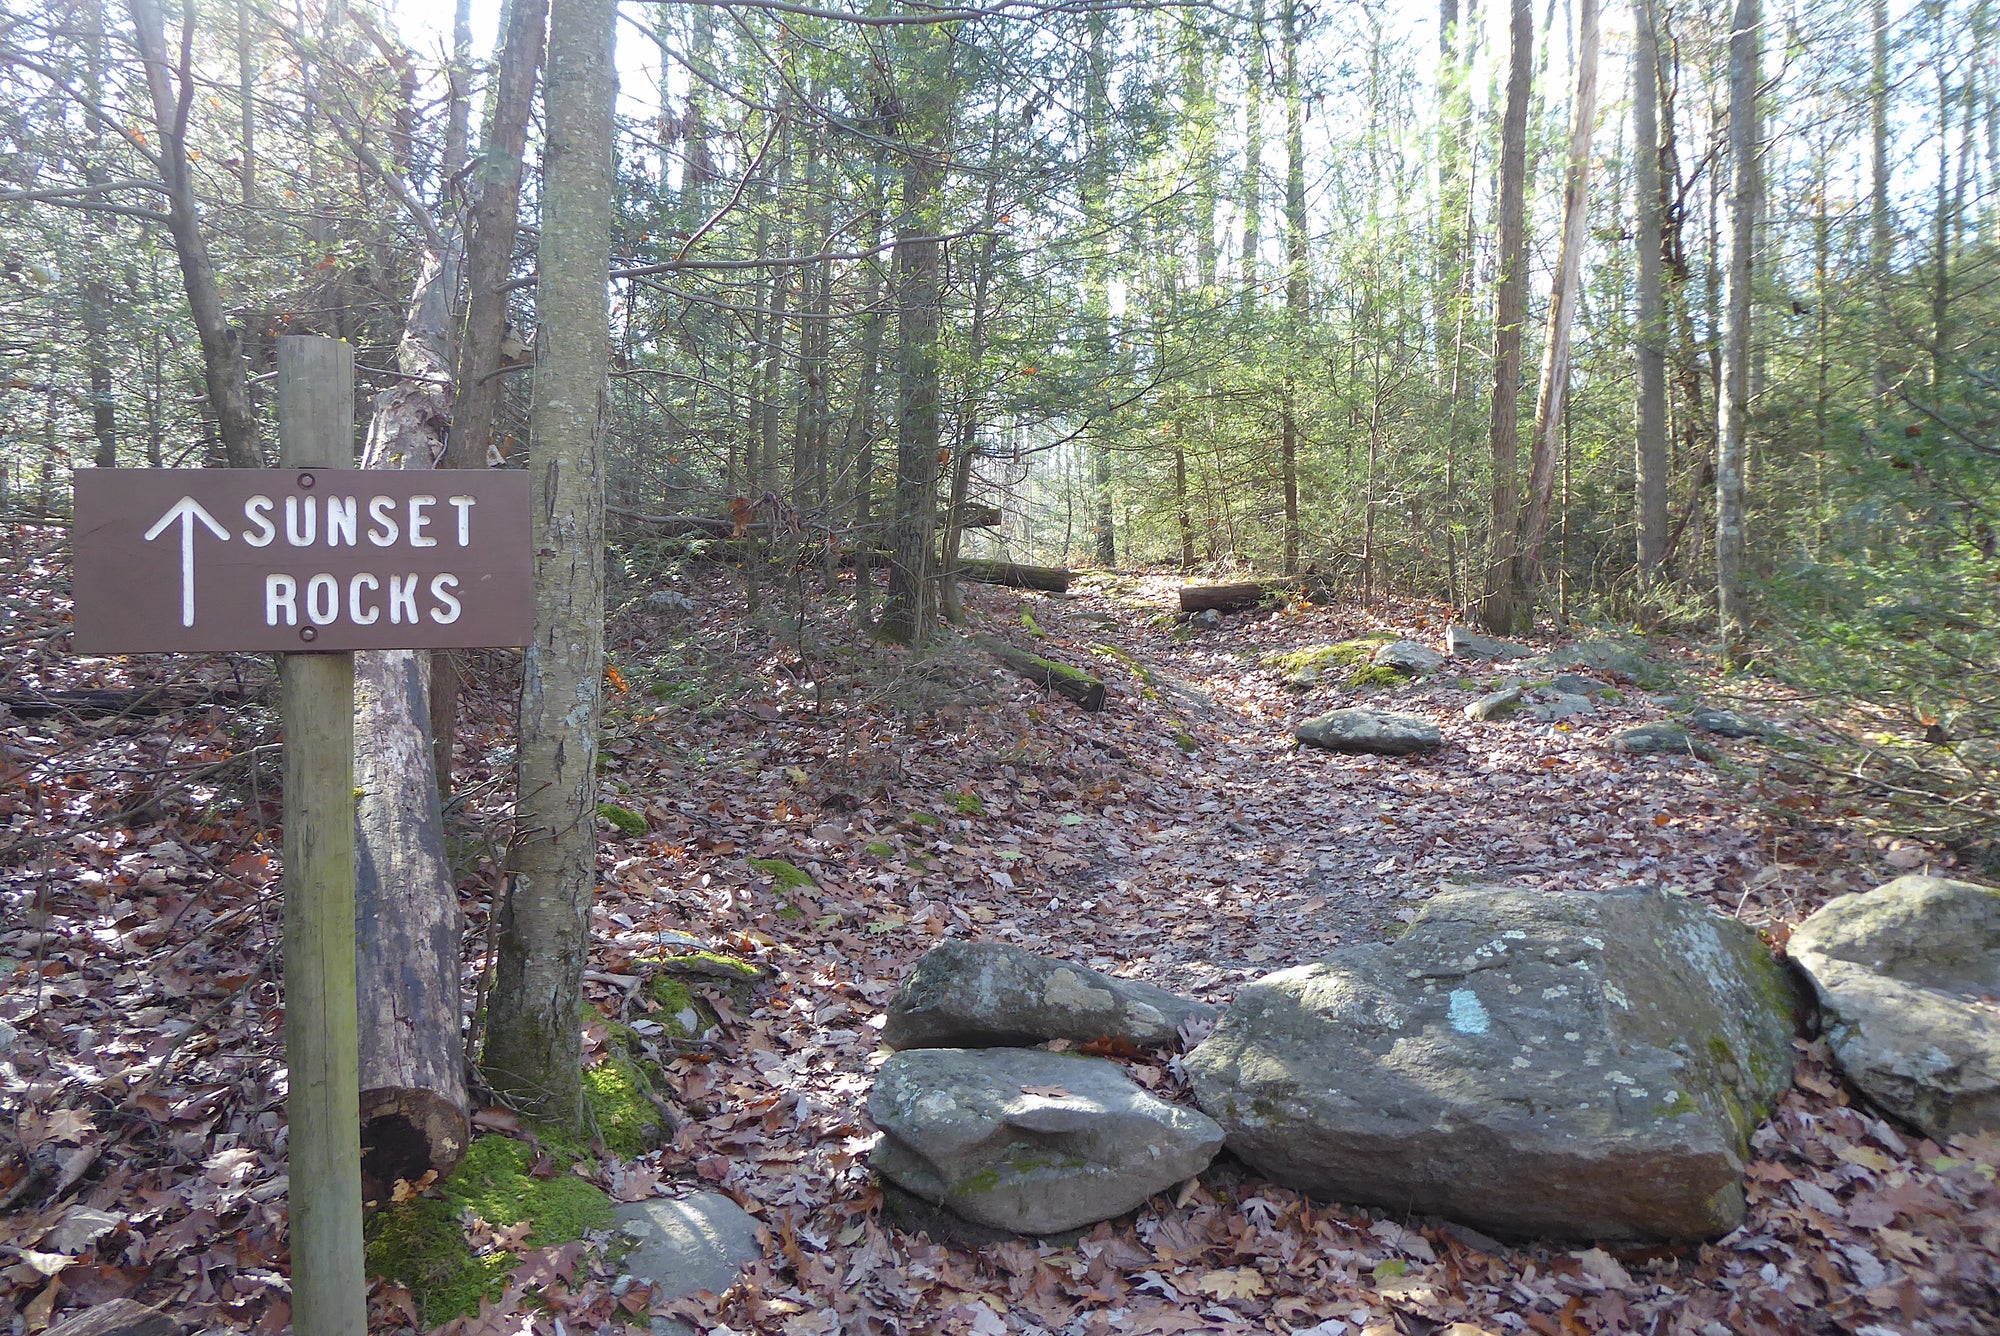 Camp Michaux and Sunset Rocks: History, Vistas and More in Michaux Forest, PA